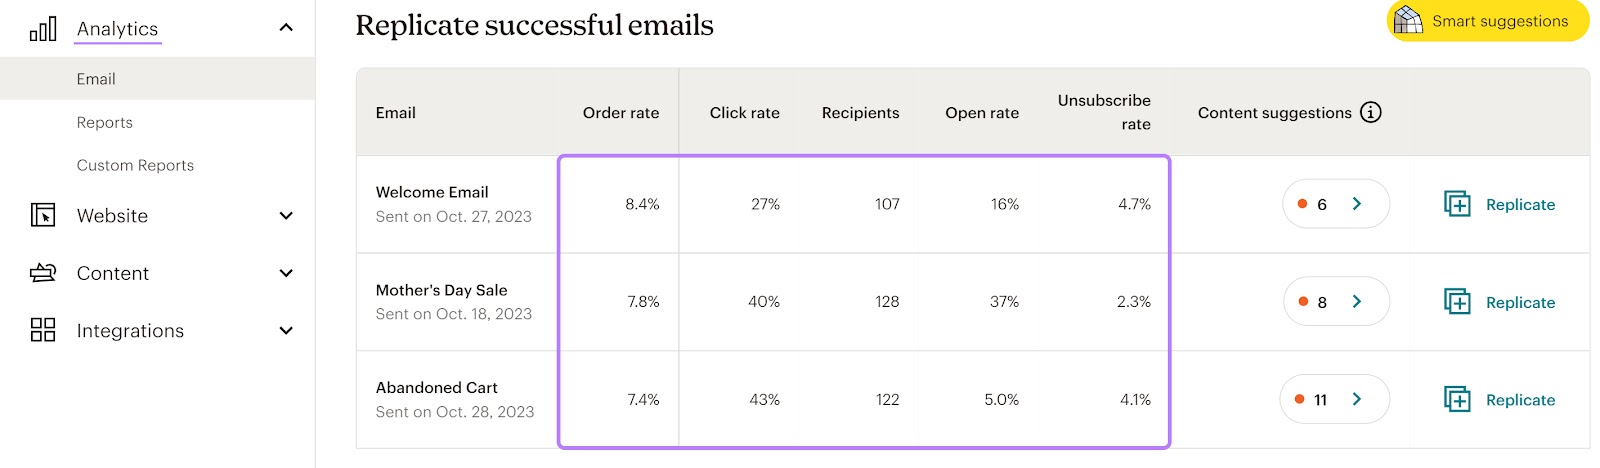 Mailchimp email analytics section